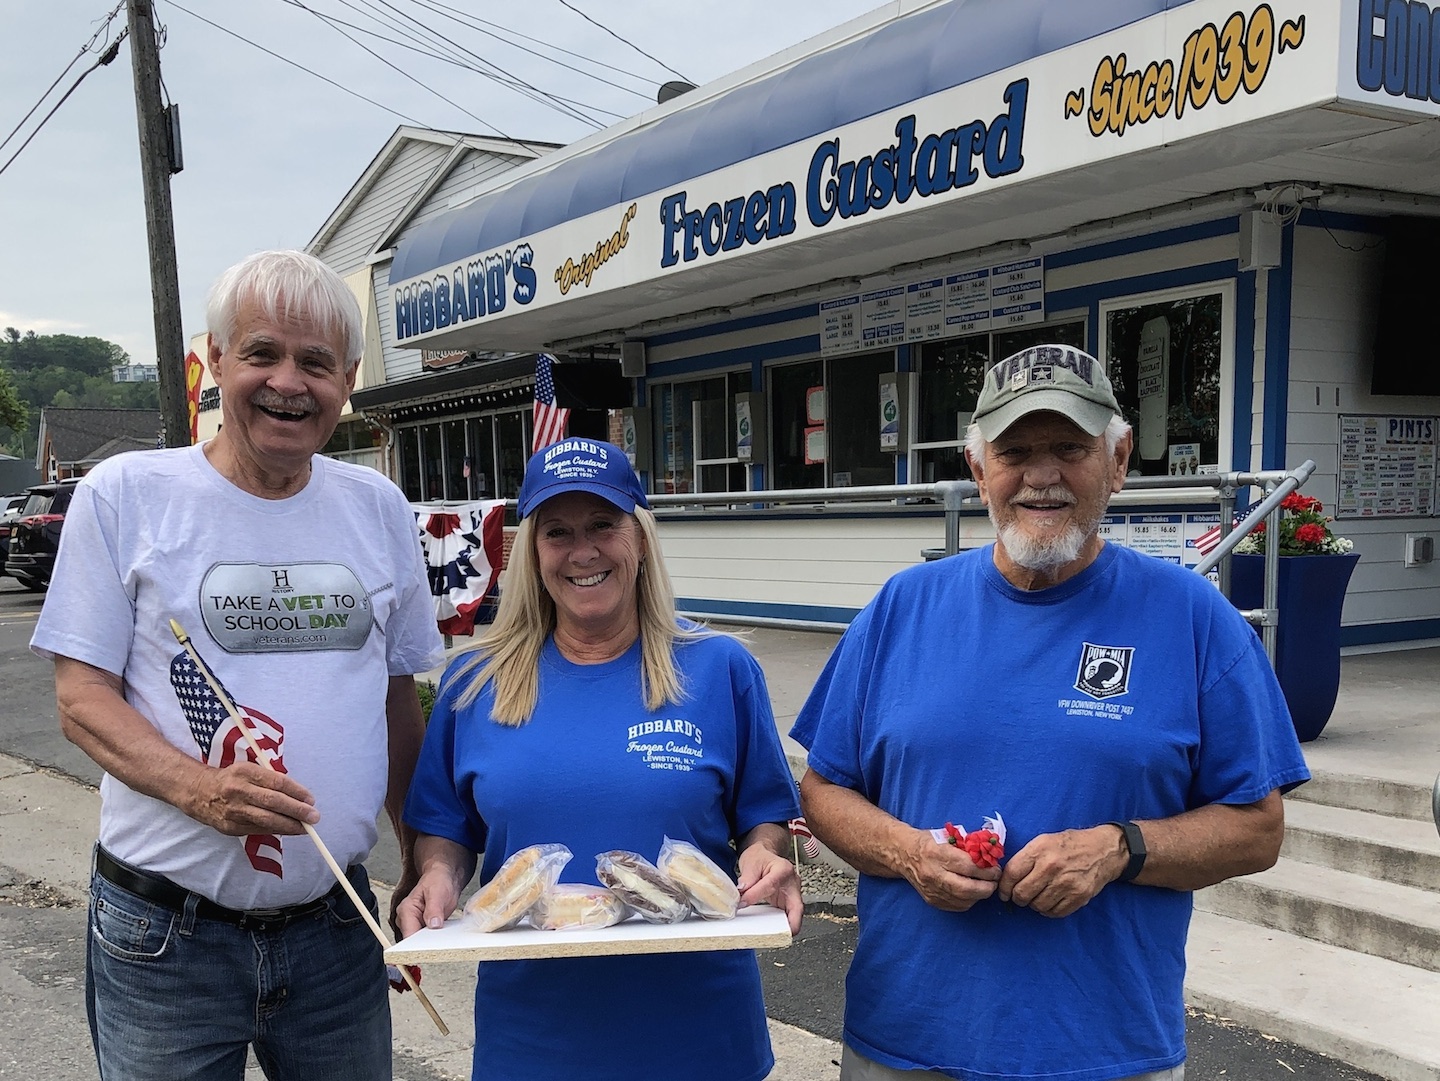 Veterans of Foreign Wars Downriver Post 7487 Cmdr. Bill Justyk and Quartermaster Vince Canosa flank Kris Trunzo of Hibbard's Original Frozen Custard. The iconic Lewiston eatery is donating proceeds to the VFW's `Circle of Honor,` across the street at Academy Park.